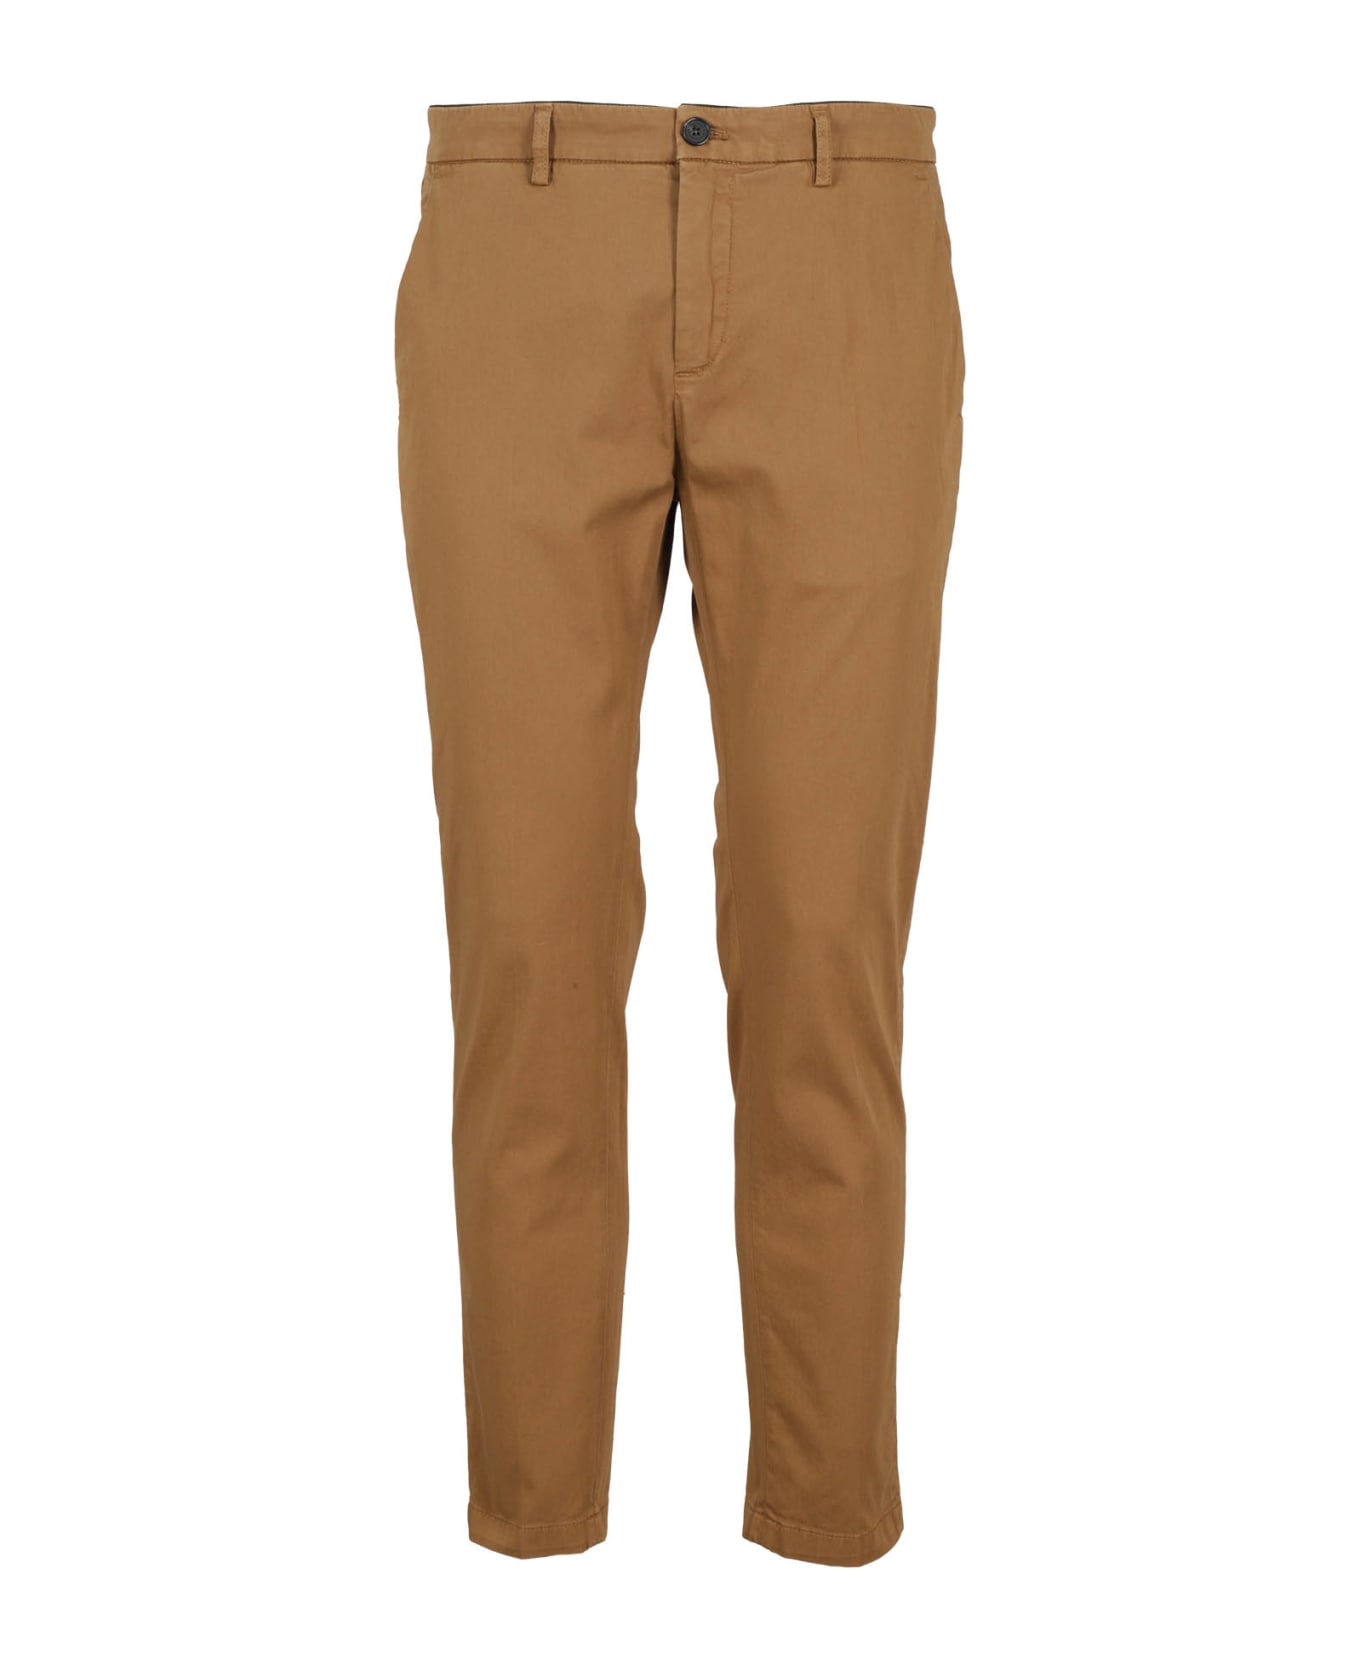 Department Five Prince Chinos - Tabacco